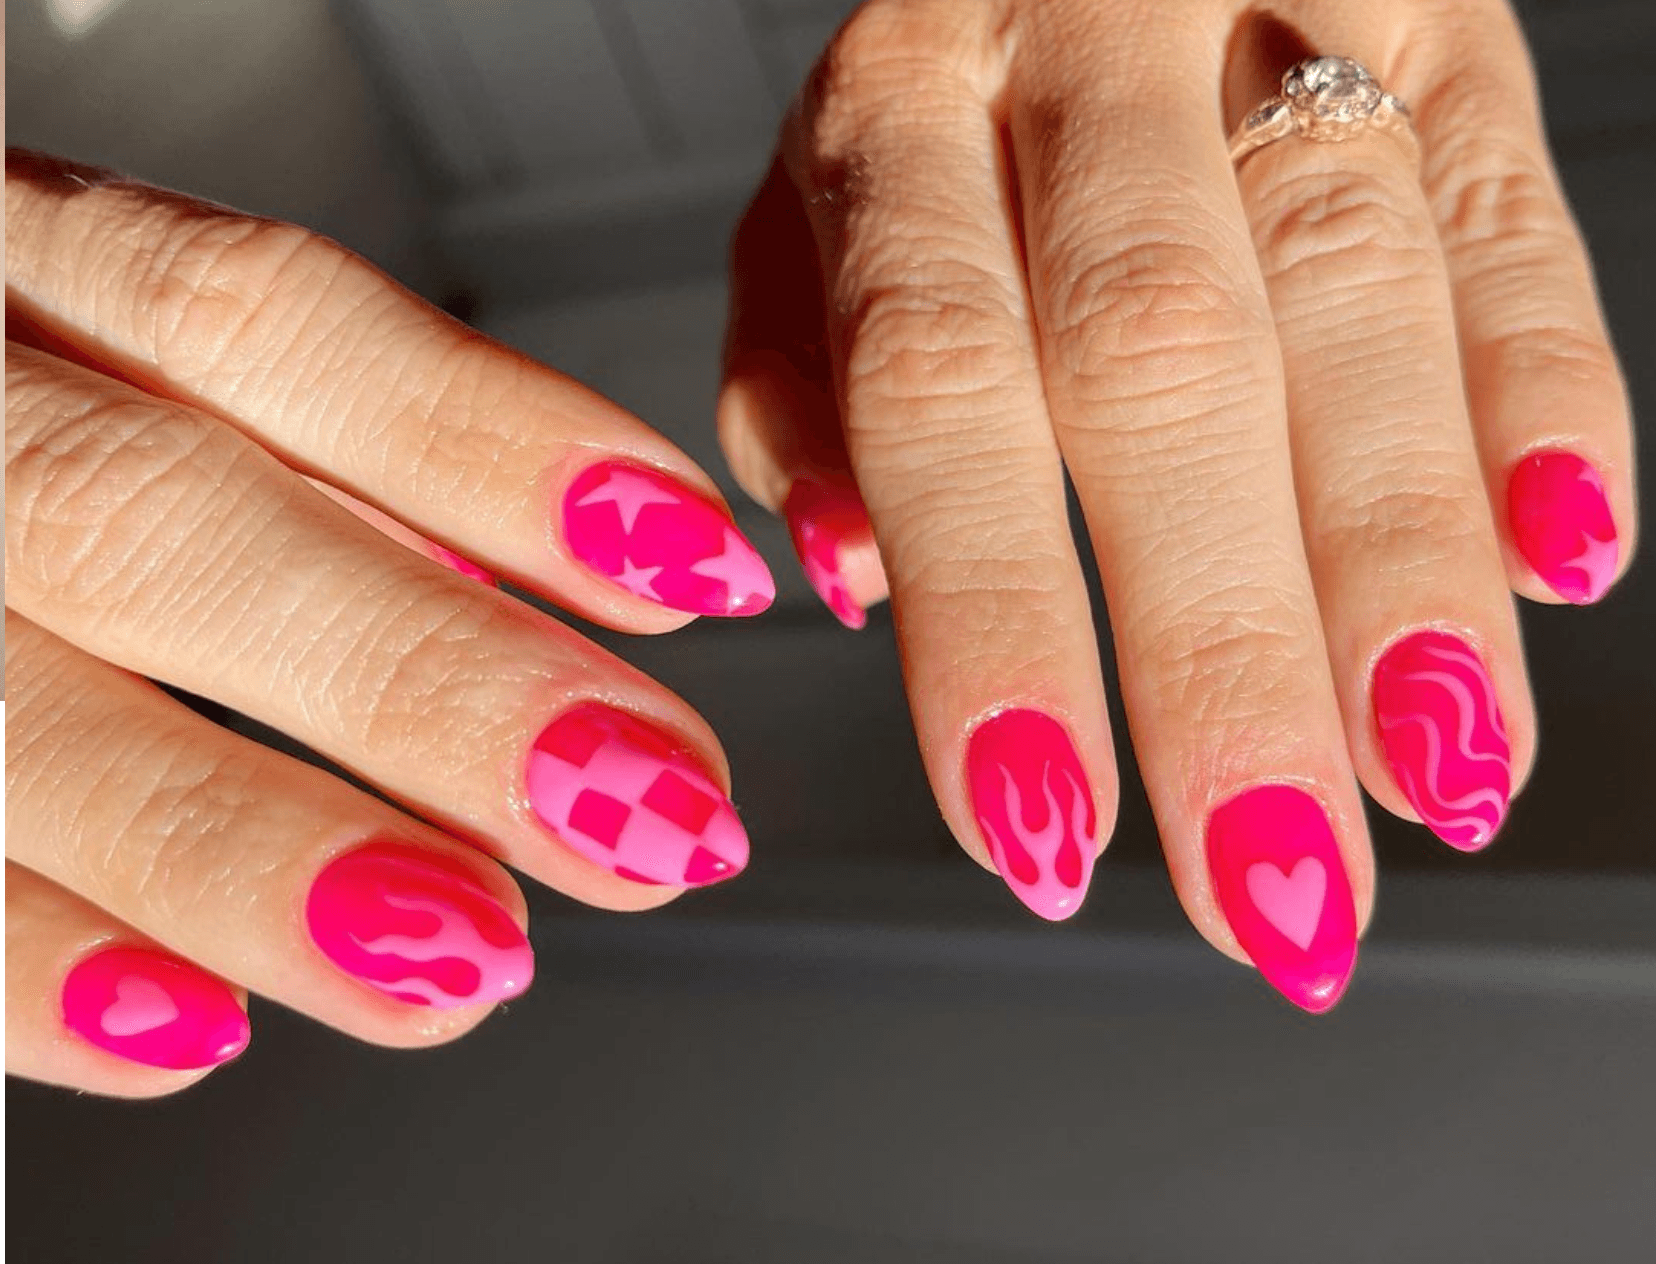 8 Barbie-Inspired Nail Designs To Bookmark For Your Next Mani 